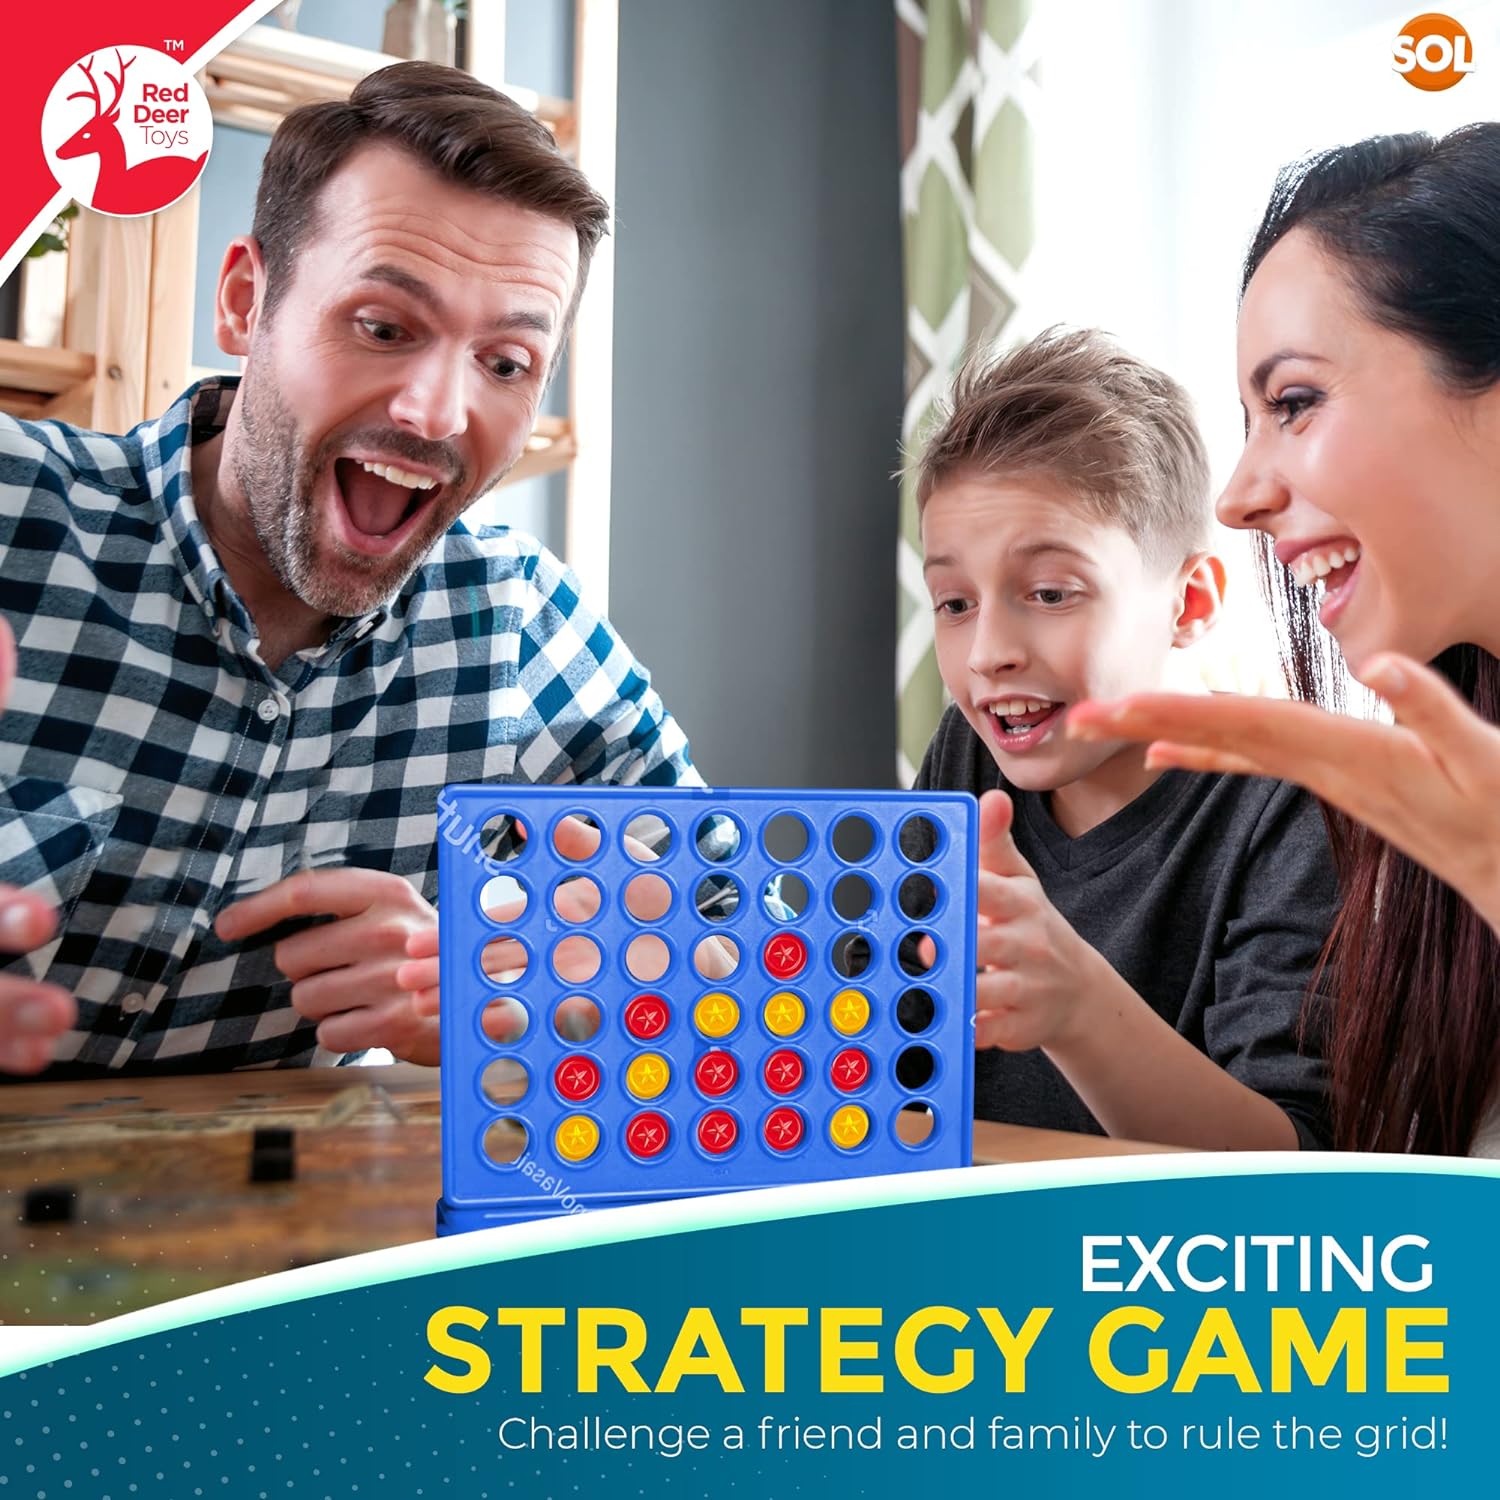 Ambassador - Grab & Go Games! - Travel 4-In-A-Row Game - Laadlee